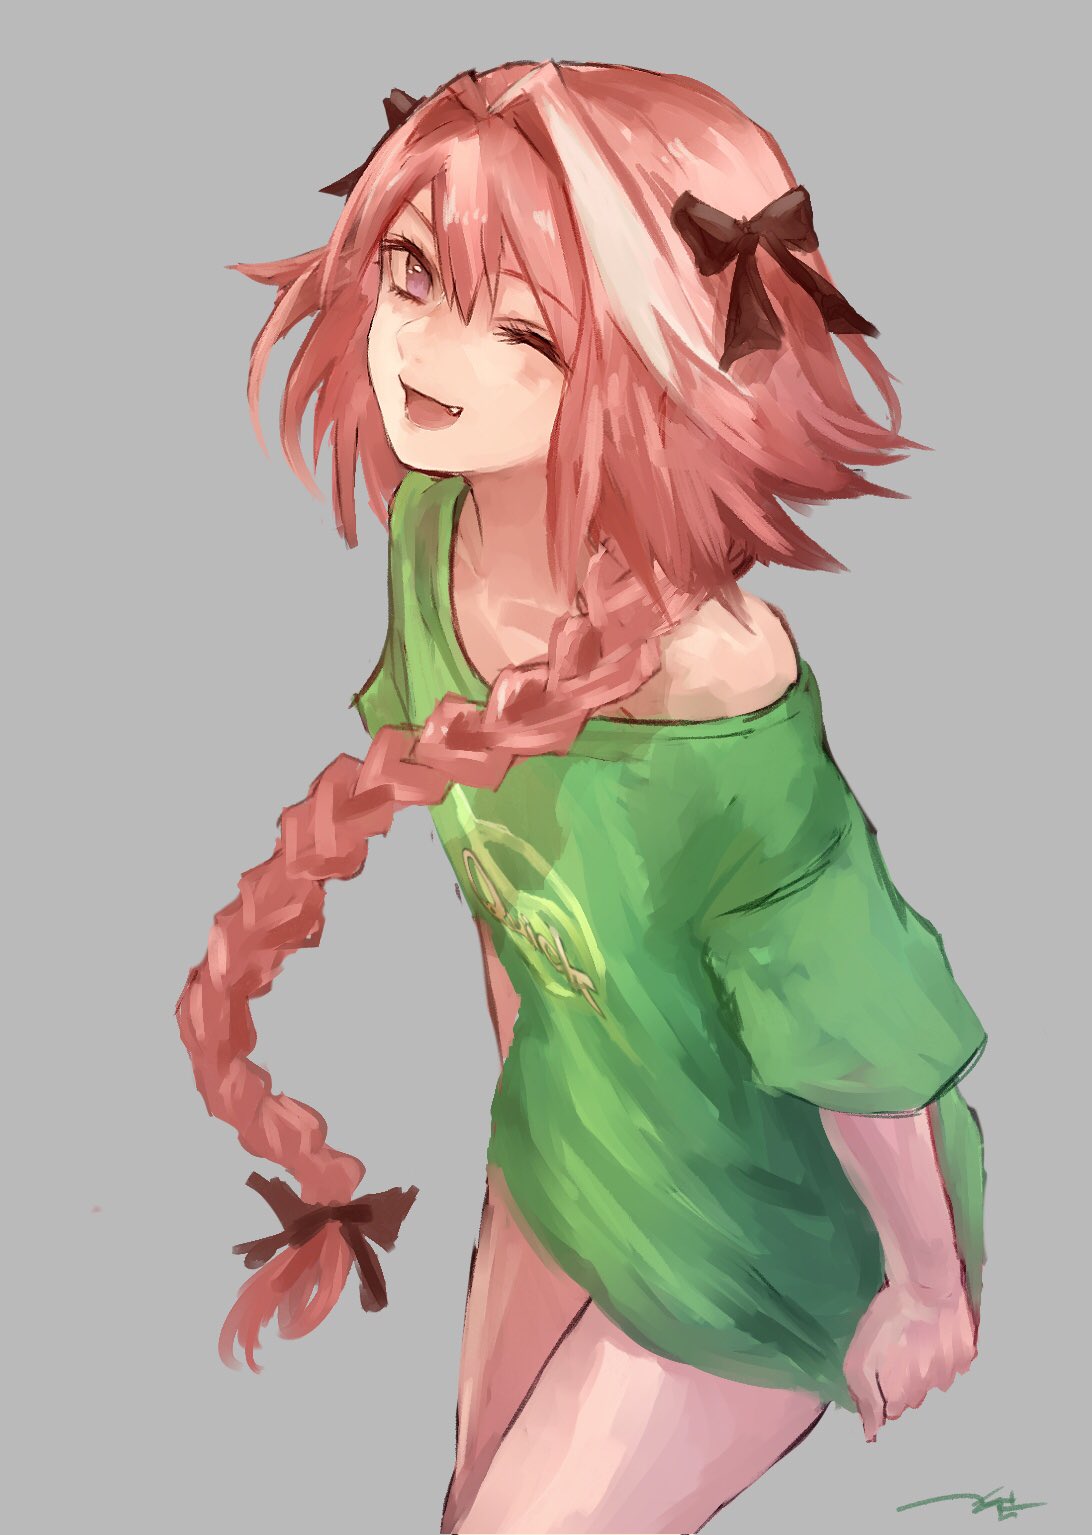 Fate Grand Order Fate Series Green Shirt Femboy Slender One Eye Closed  Bicolored Hair Pink Hair Whit Wallpaper - Resolution:1092x1535 - ID:1209929  